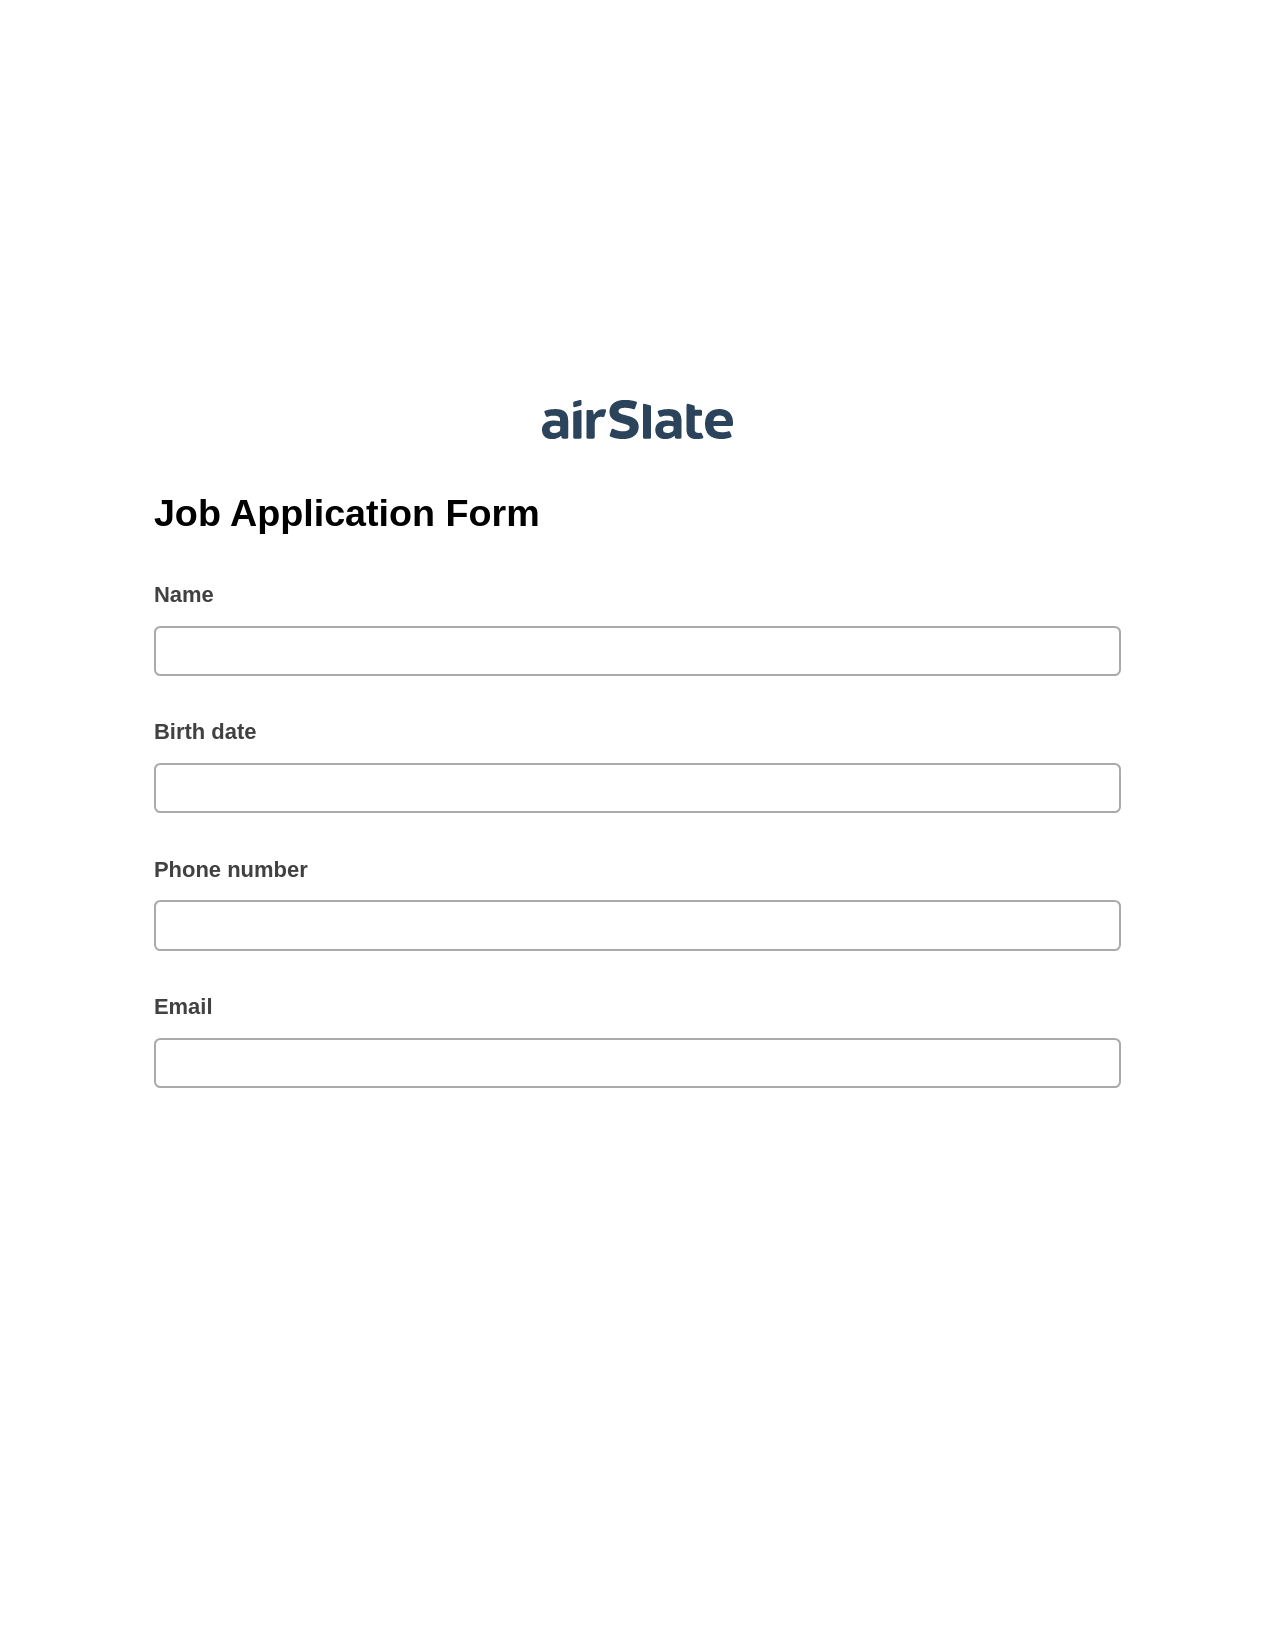 Job Application Form Pre-fill from Salesforce Records with SOQL Bot, Lock the slate bot, Export to Smartsheet